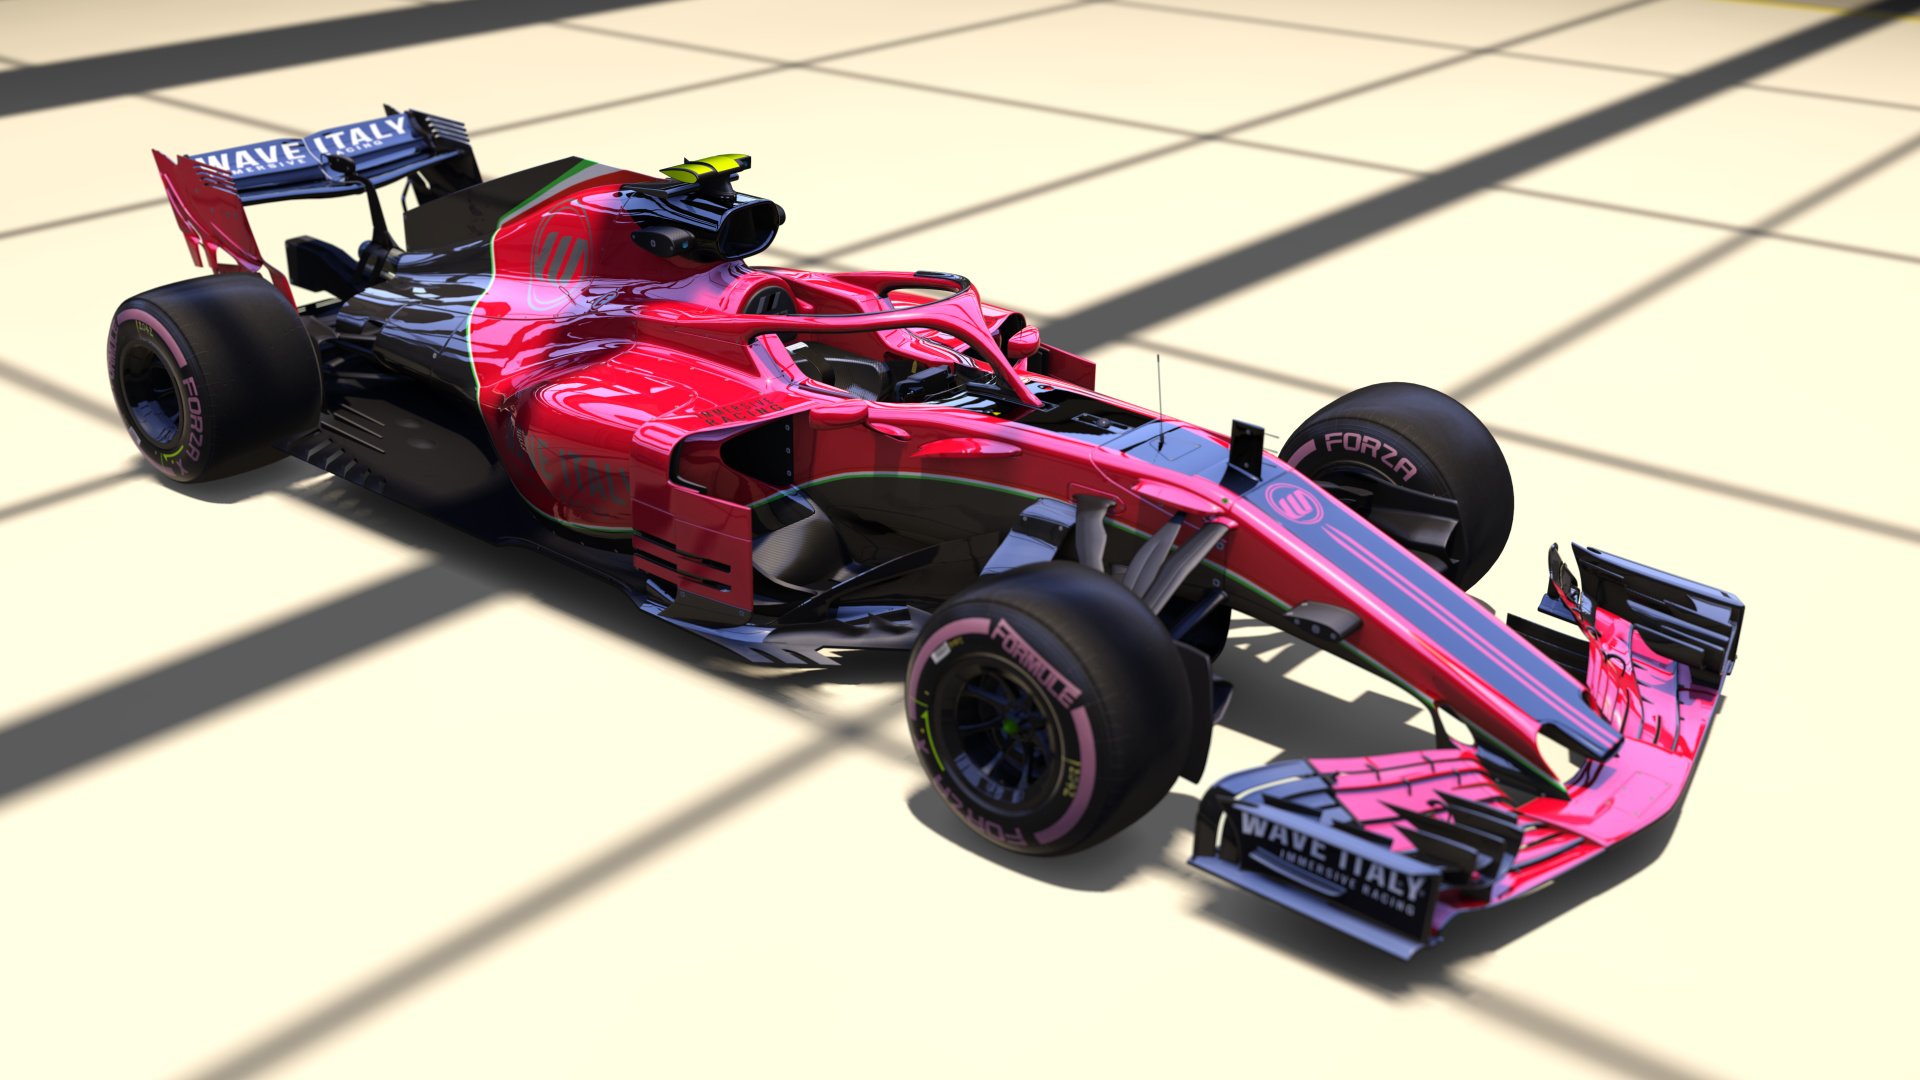 More information about "Assetto Corsa: Formula Hybrid 2018 by RSS update v3.0"